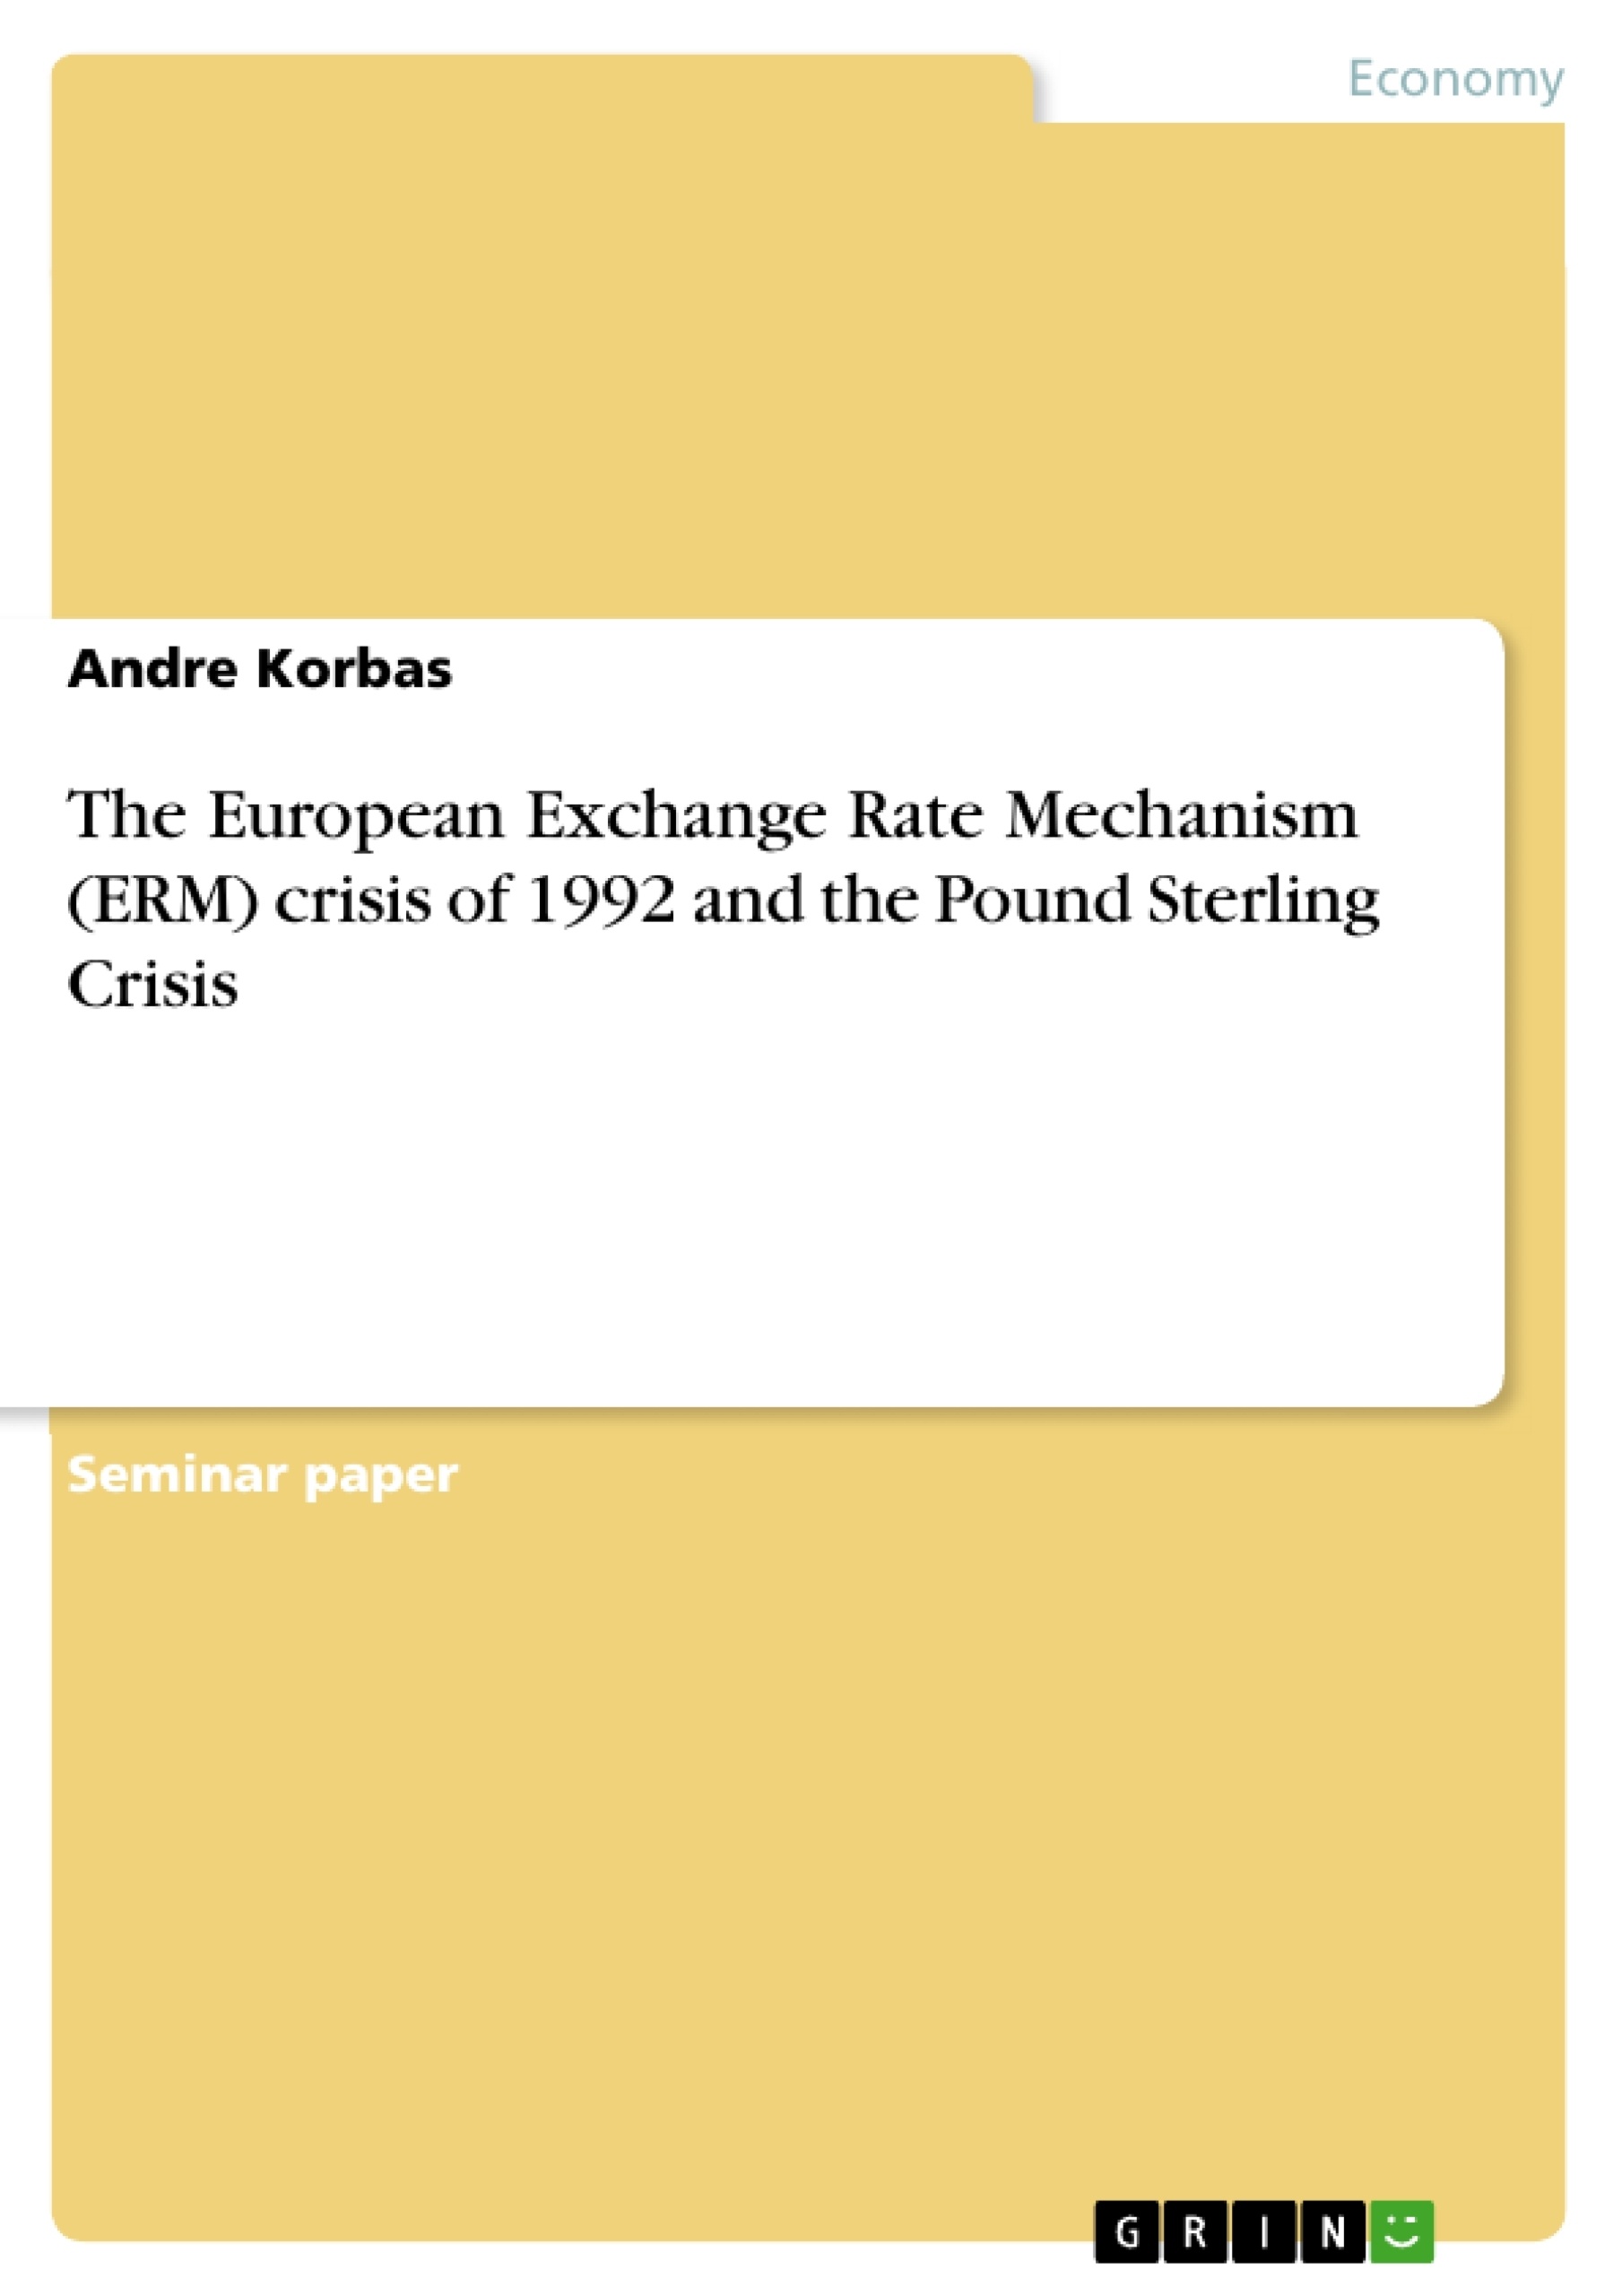 Title: The European Exchange Rate Mechanism (ERM) crisis of 1992 and the Pound Sterling Crisis